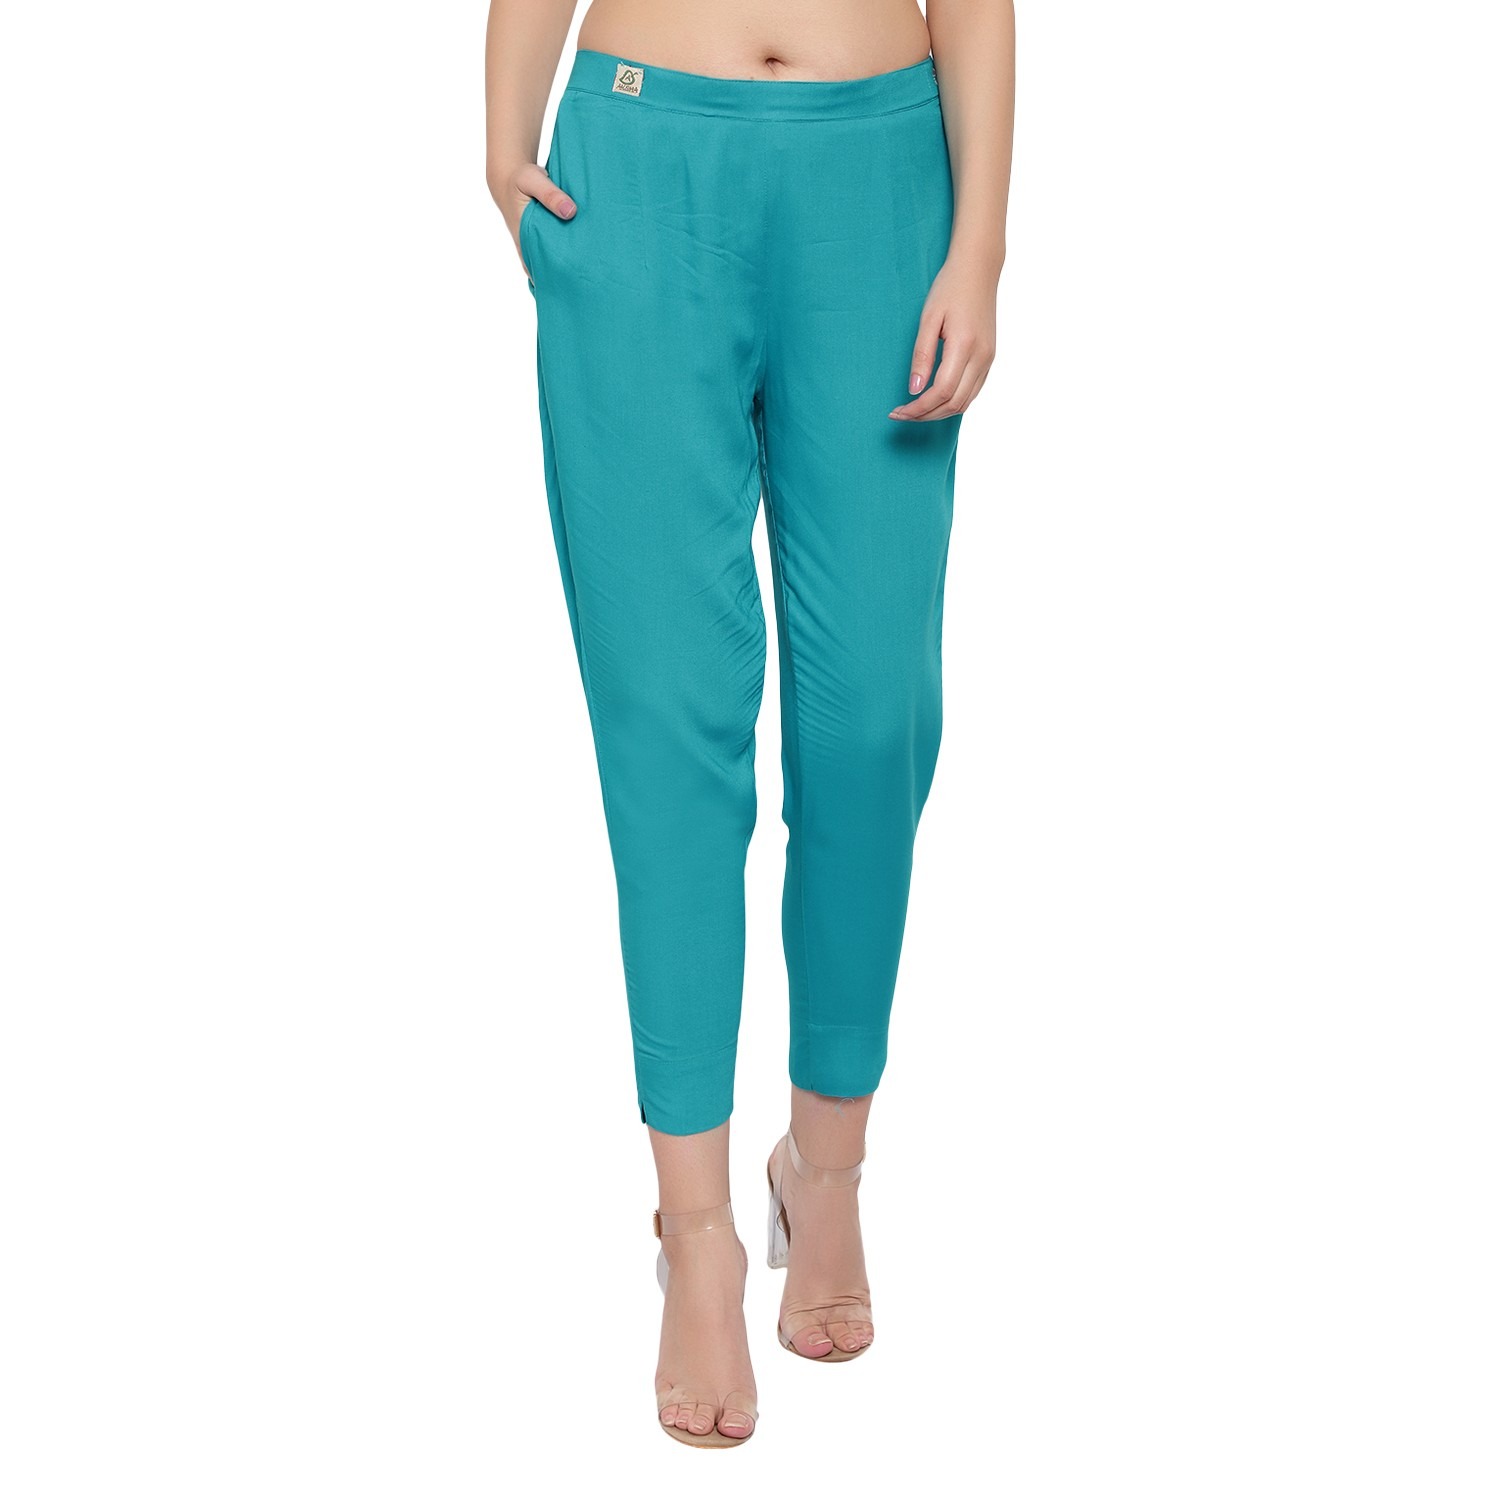 Buy Women Turquoise Trousers online in India -Akshalifestyle